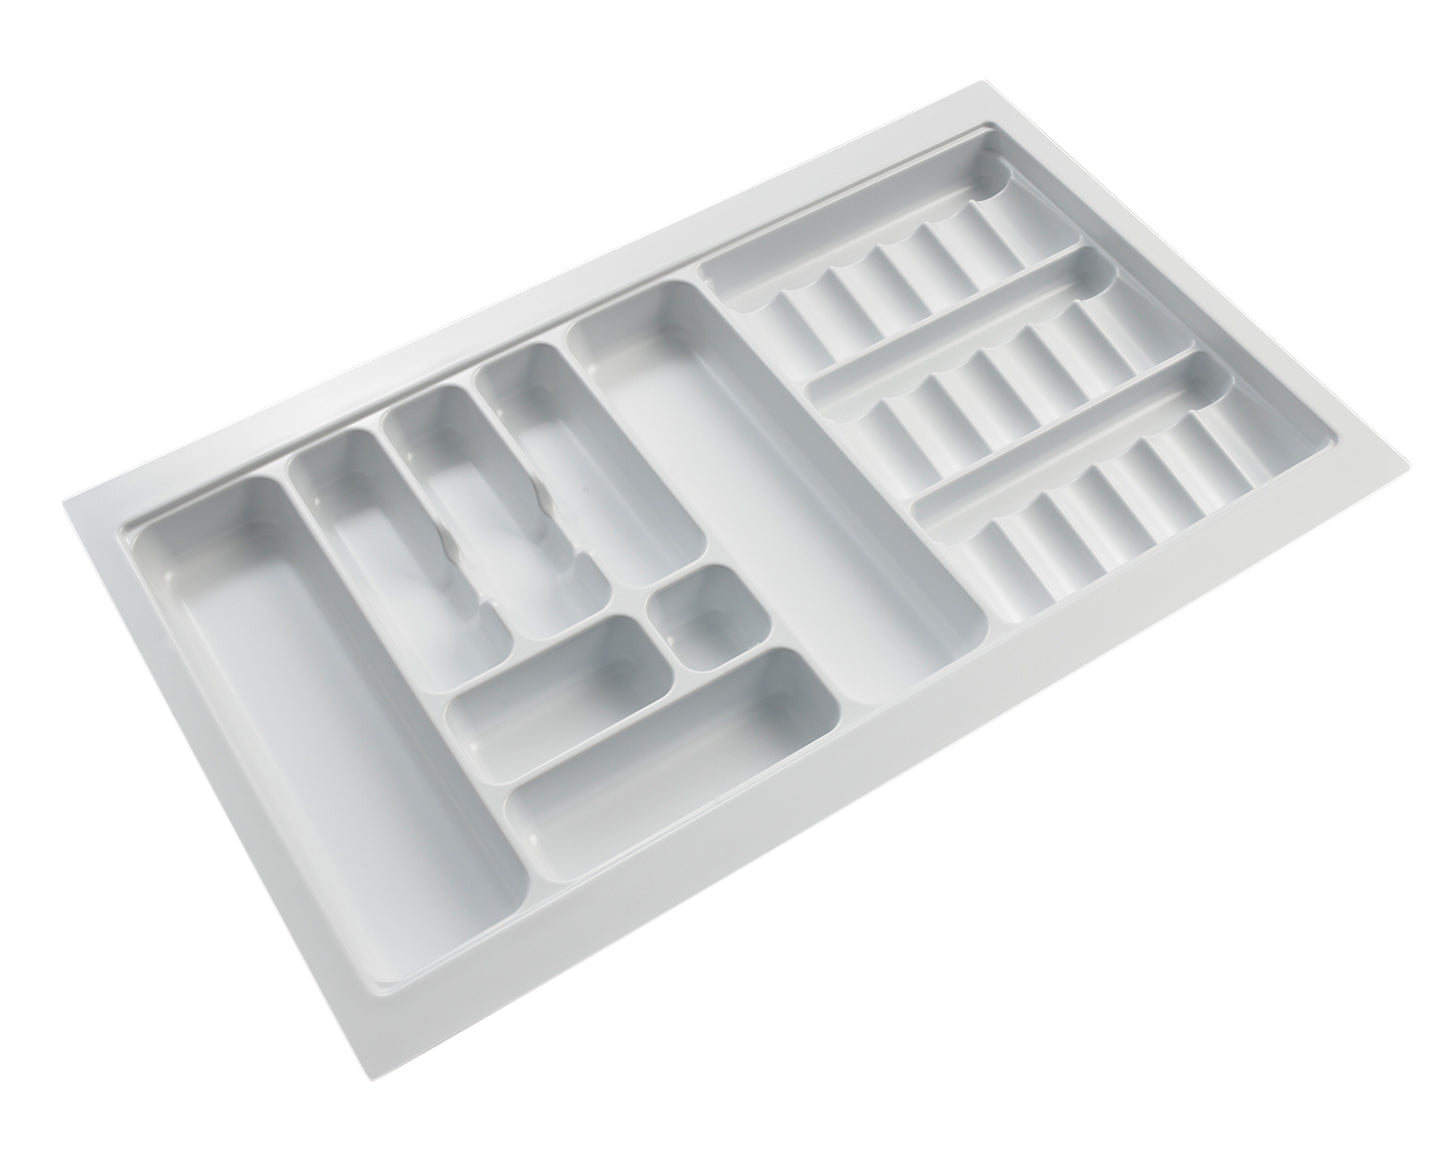 Cutlery Tray OBSP 900 White